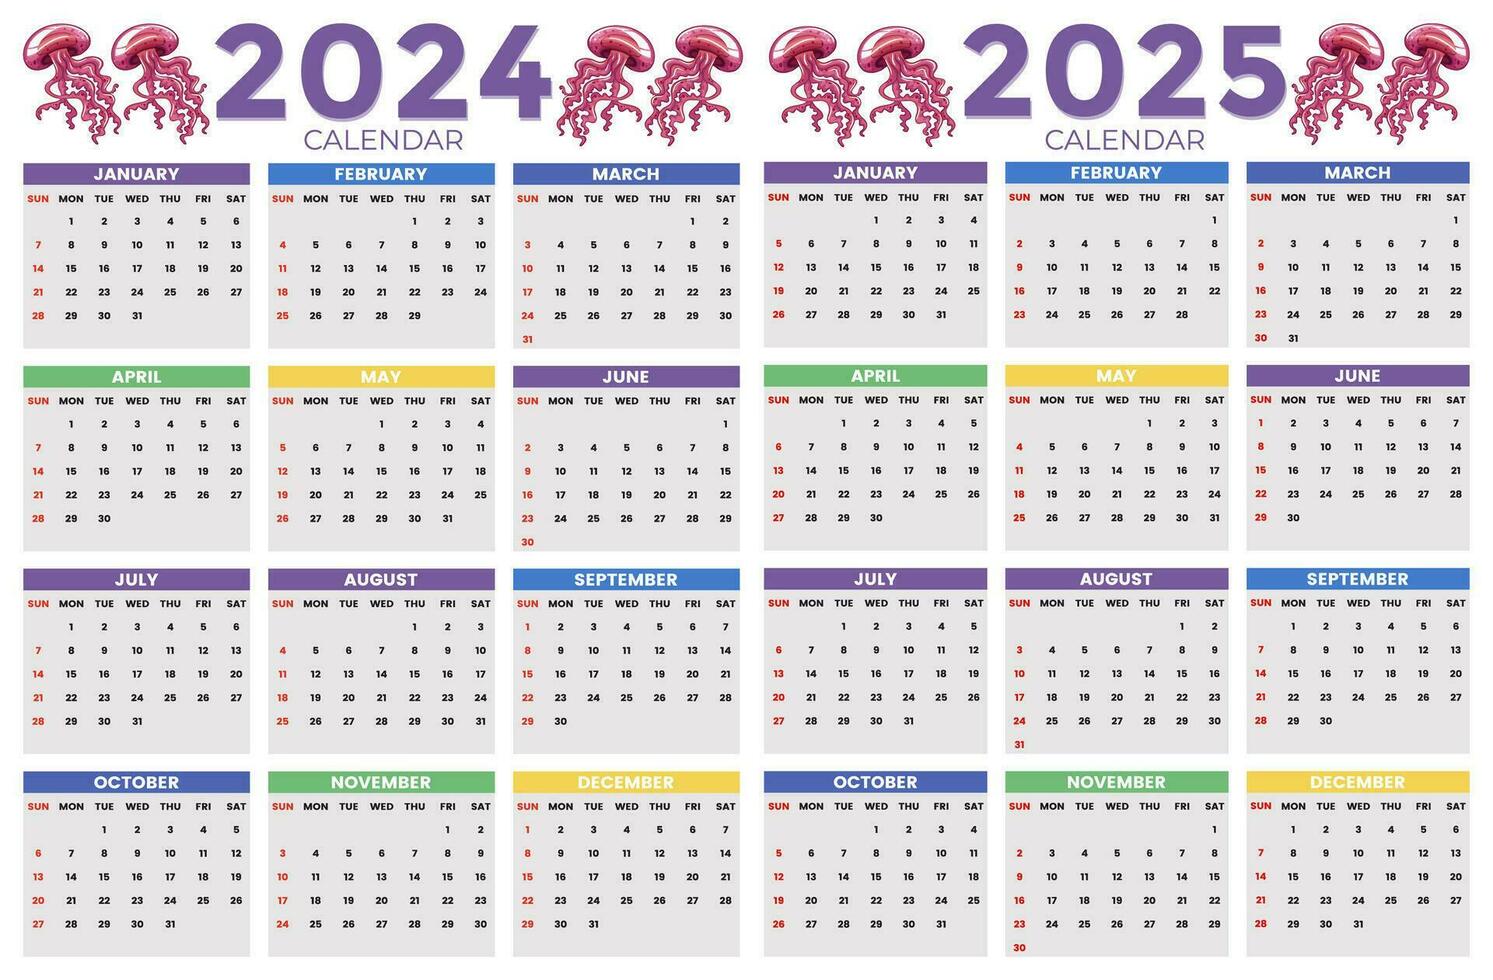 2024, 2025 calendar design template for happy new year vector